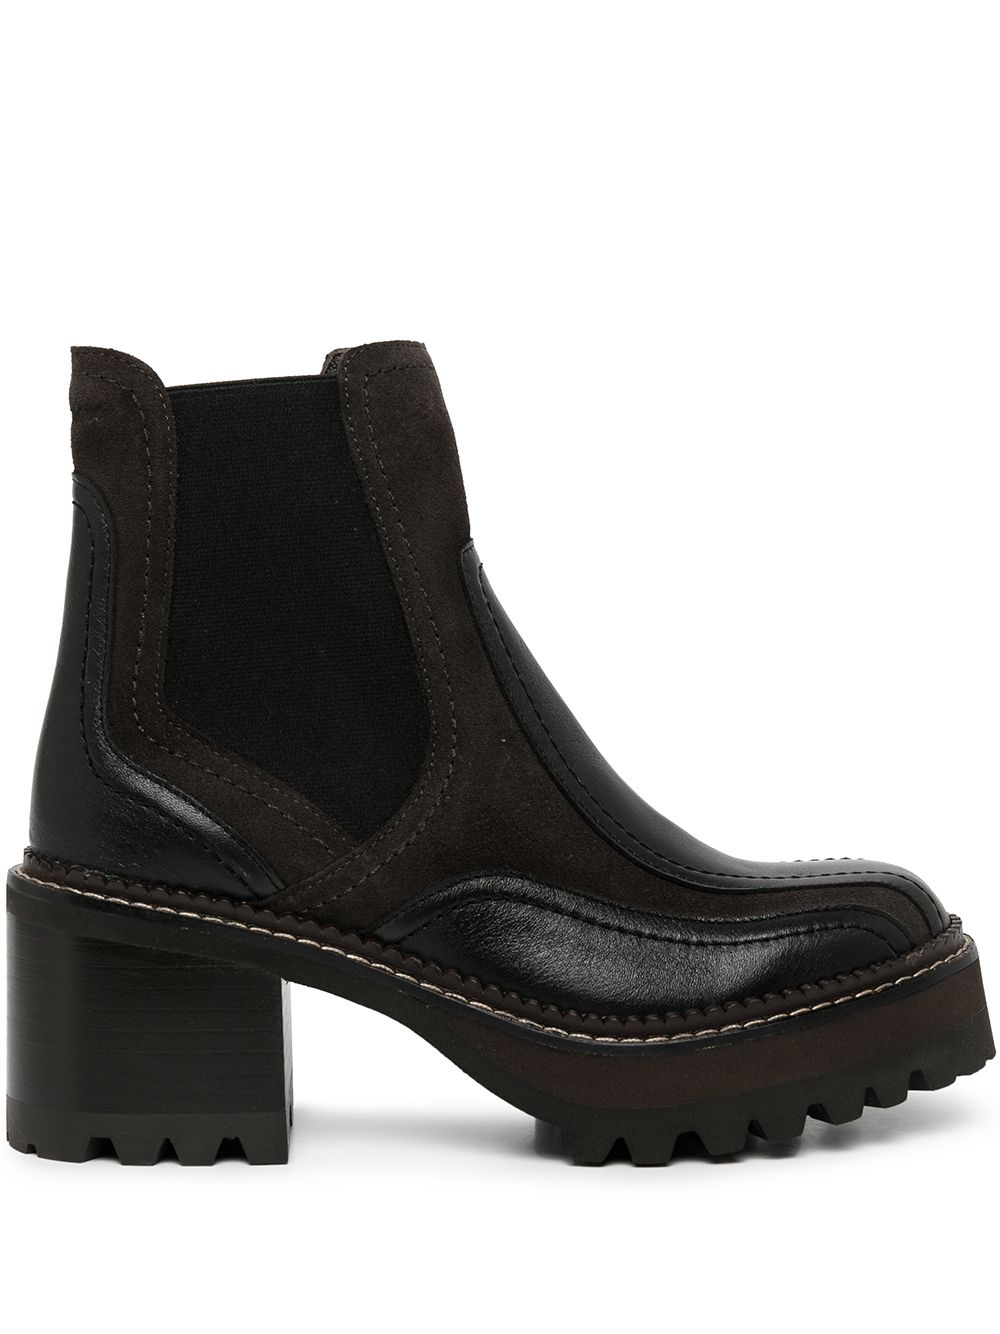 See by Chloé panelled leather Chelsea boots - Black von See by Chloé